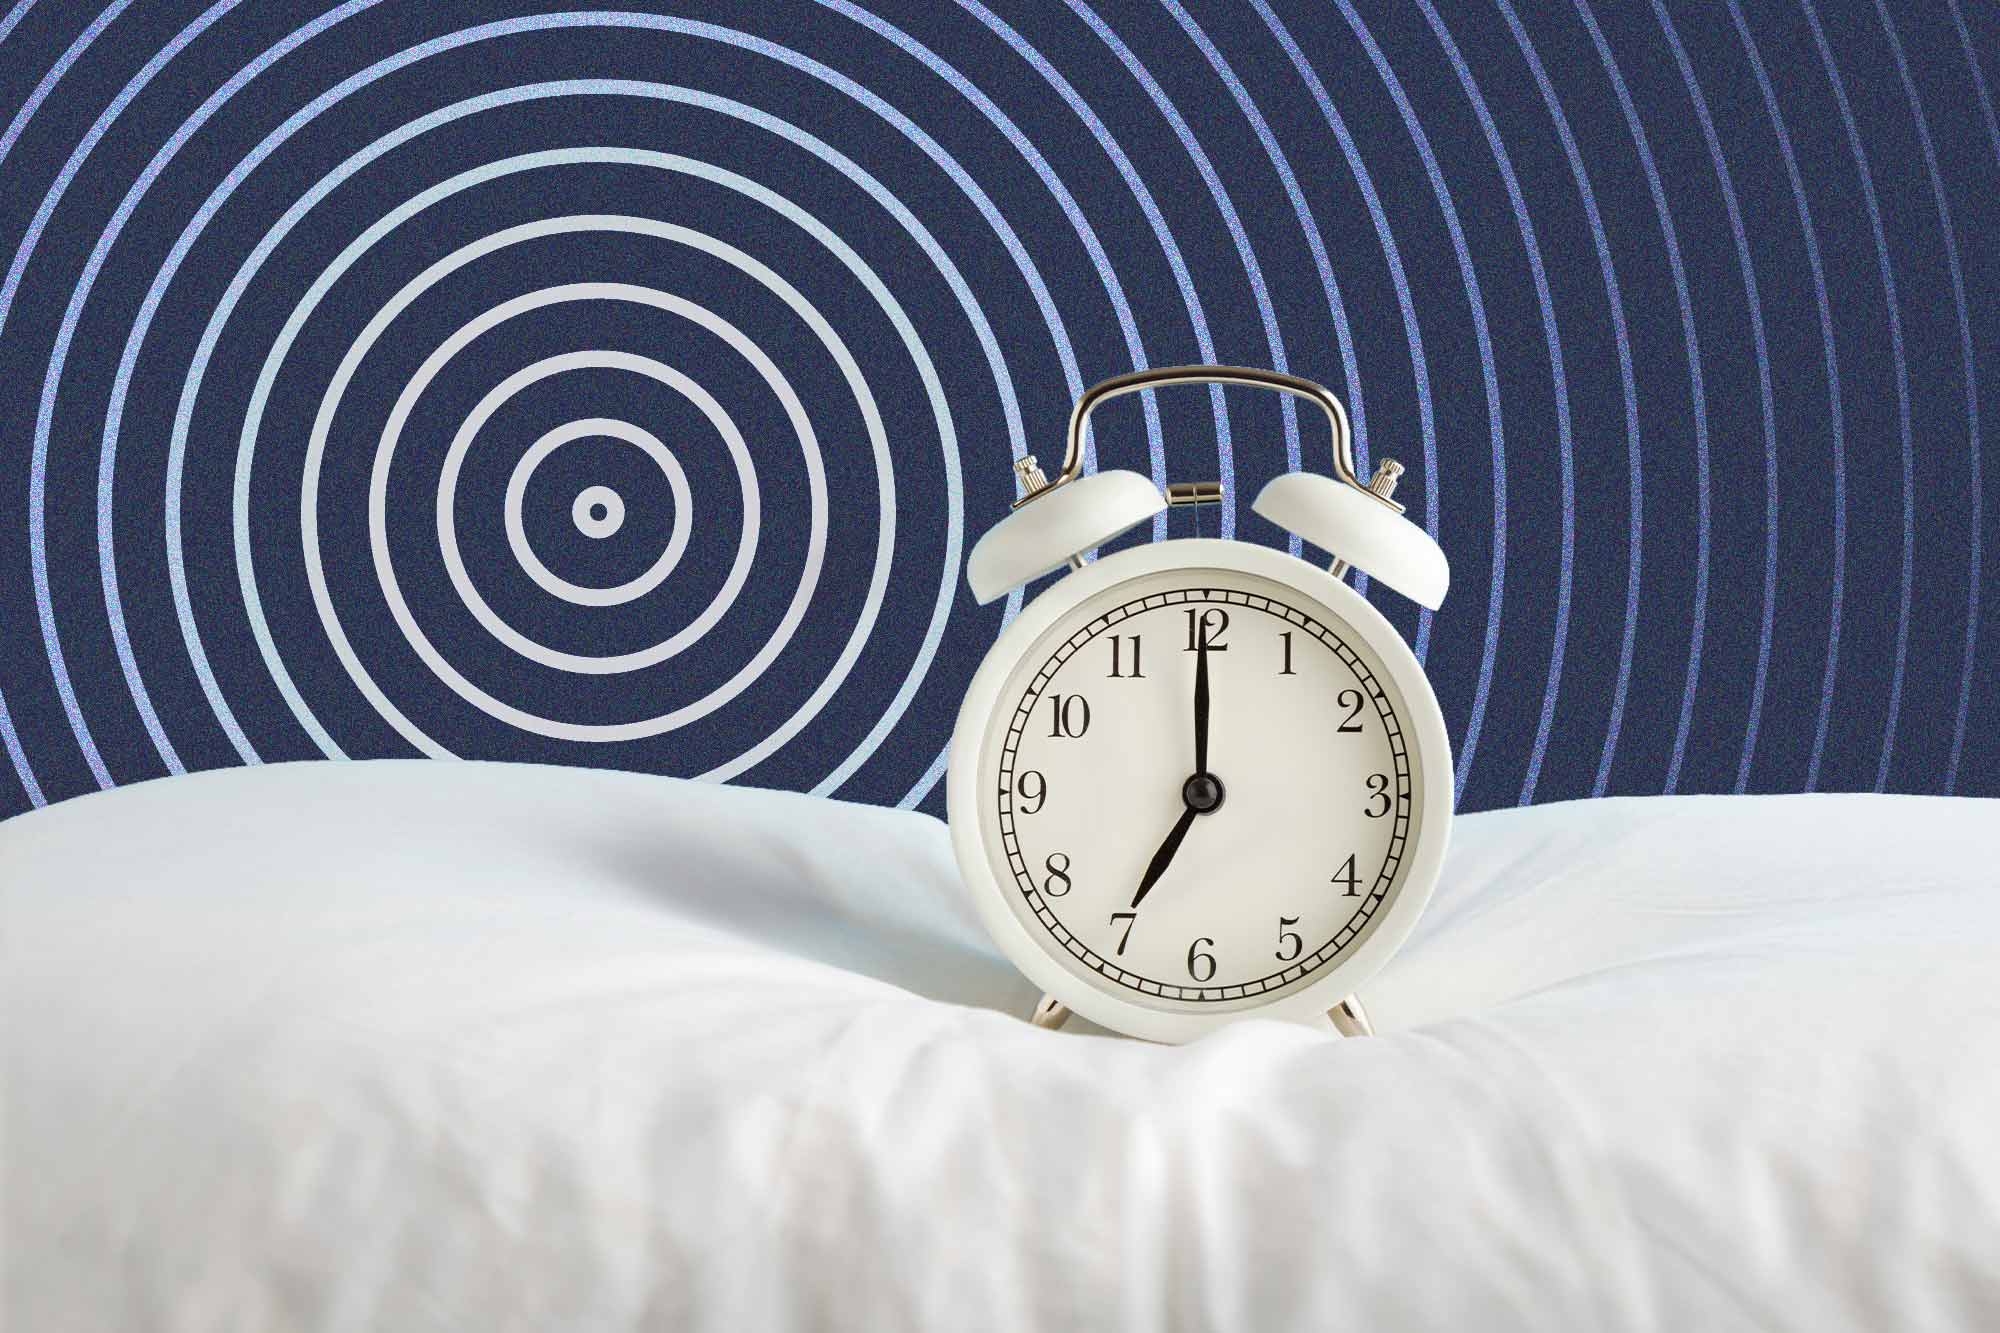 Illustration of a spiral overlayed with a photo of an alarm clock on a bed